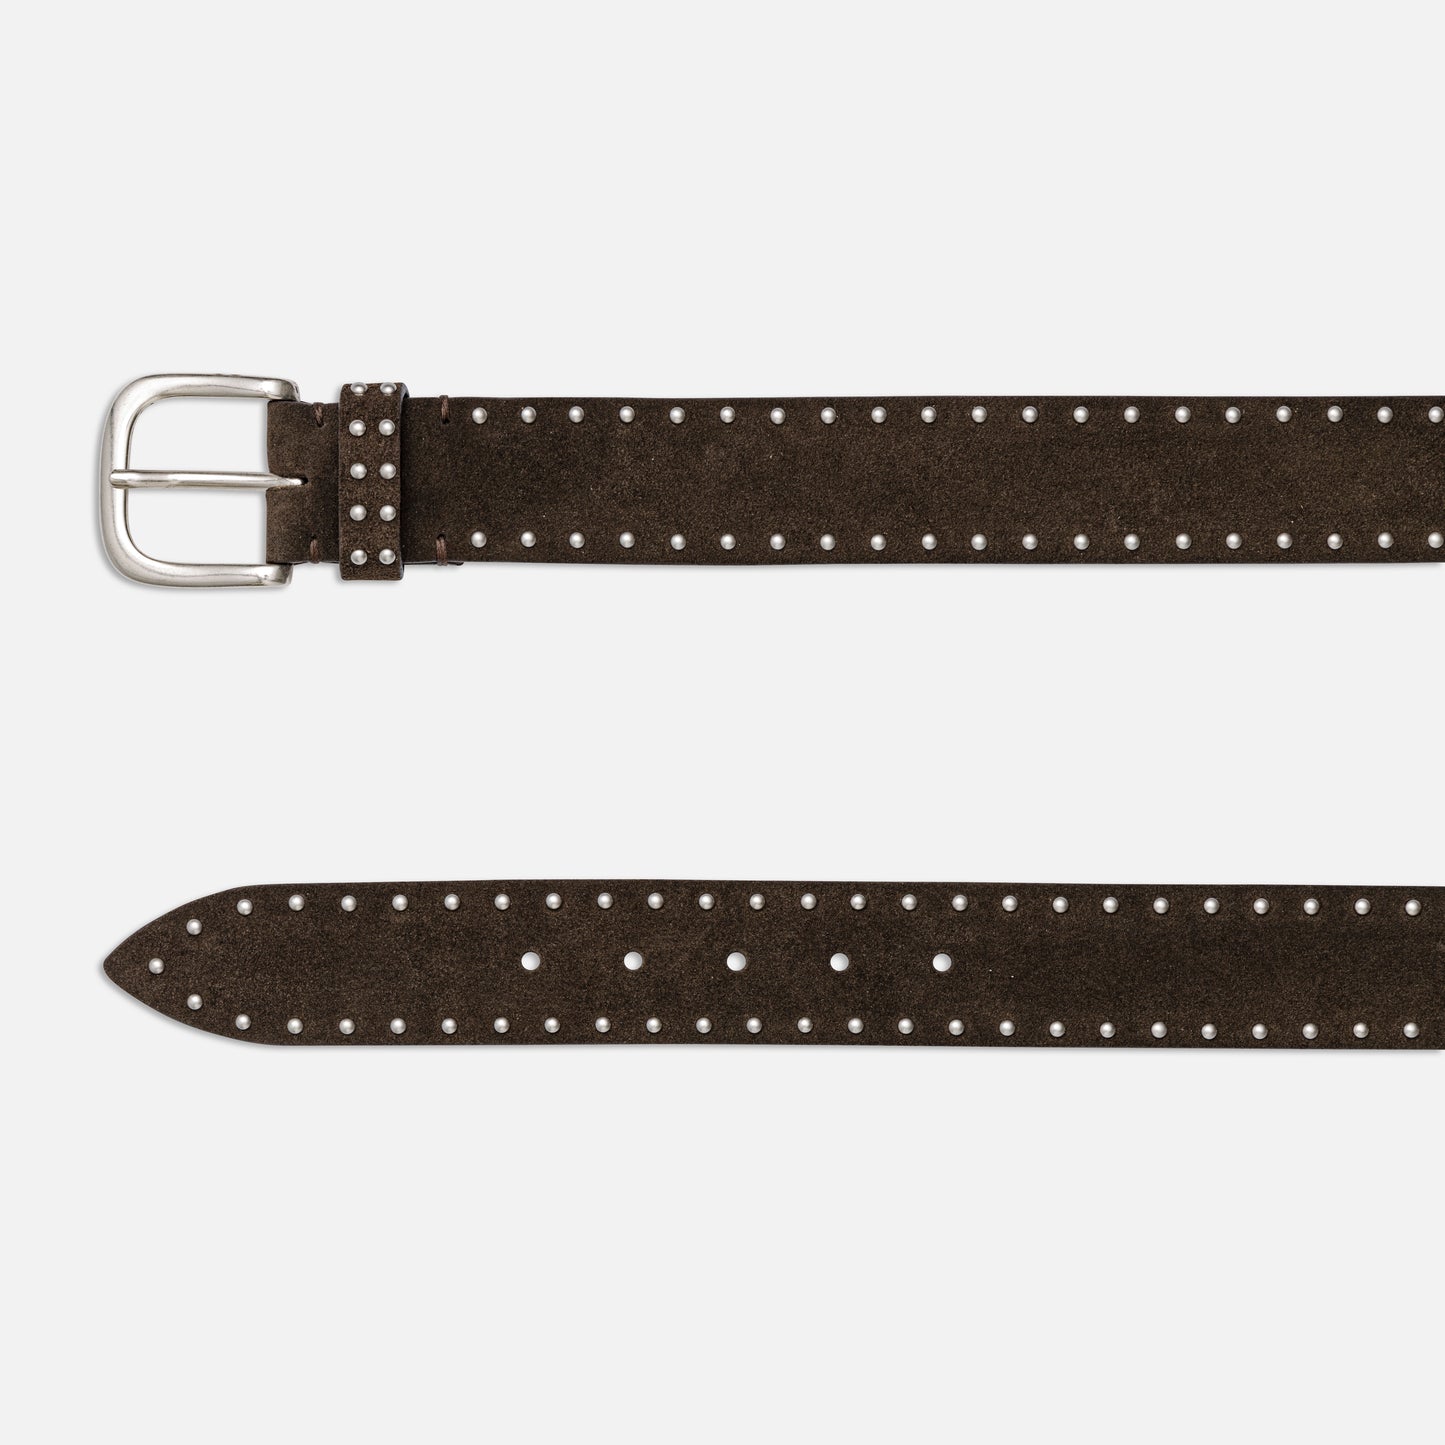 TESTA MORO ALASKA LEATHER BELTS WITH STUDS AND SILVER BUCKLE  H 4 cm